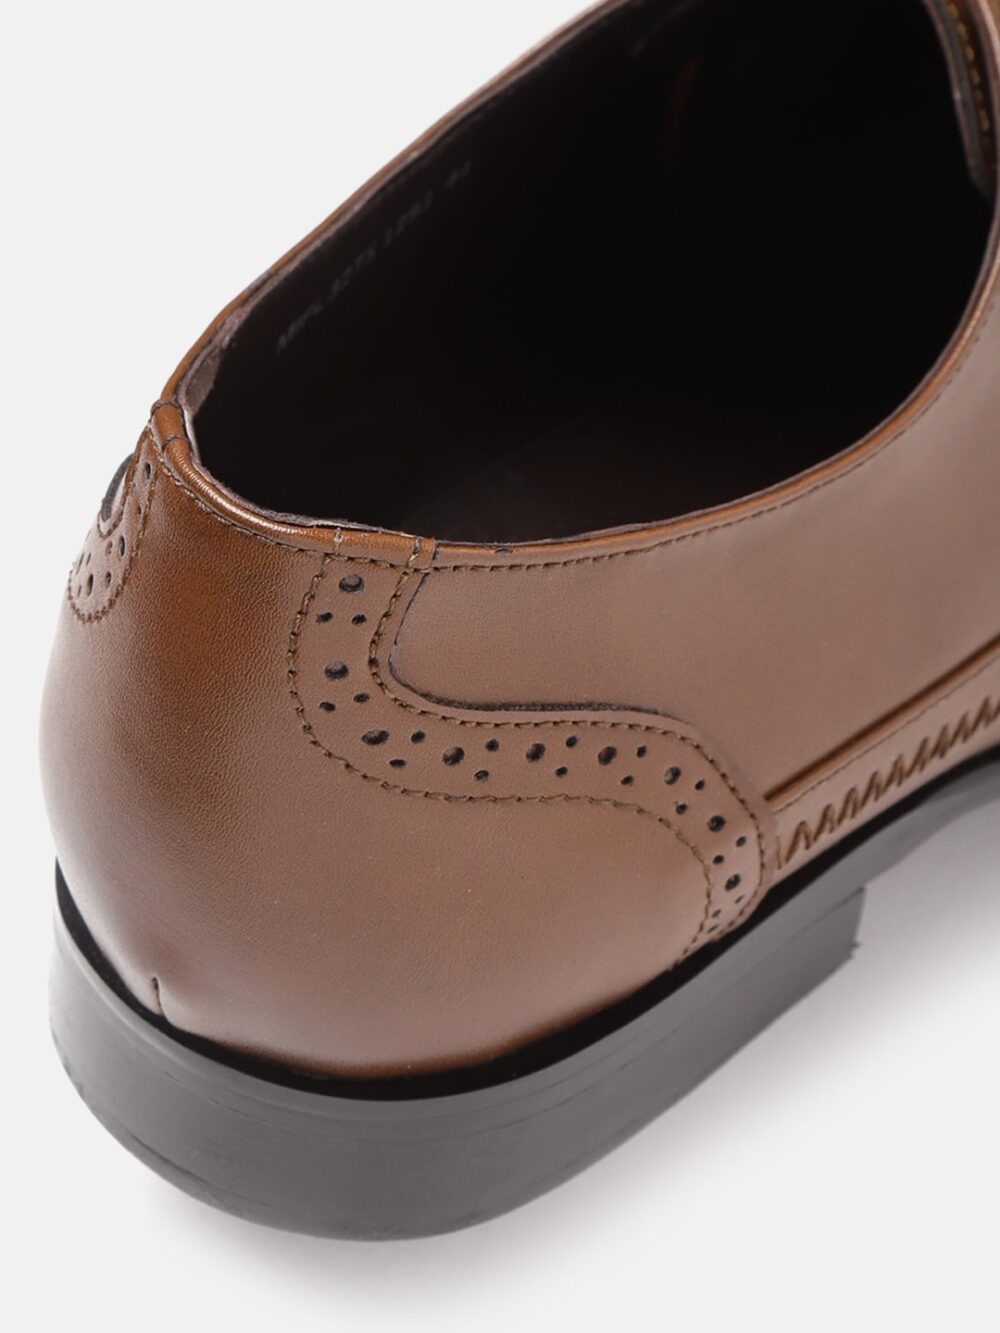 formal leather shoes online